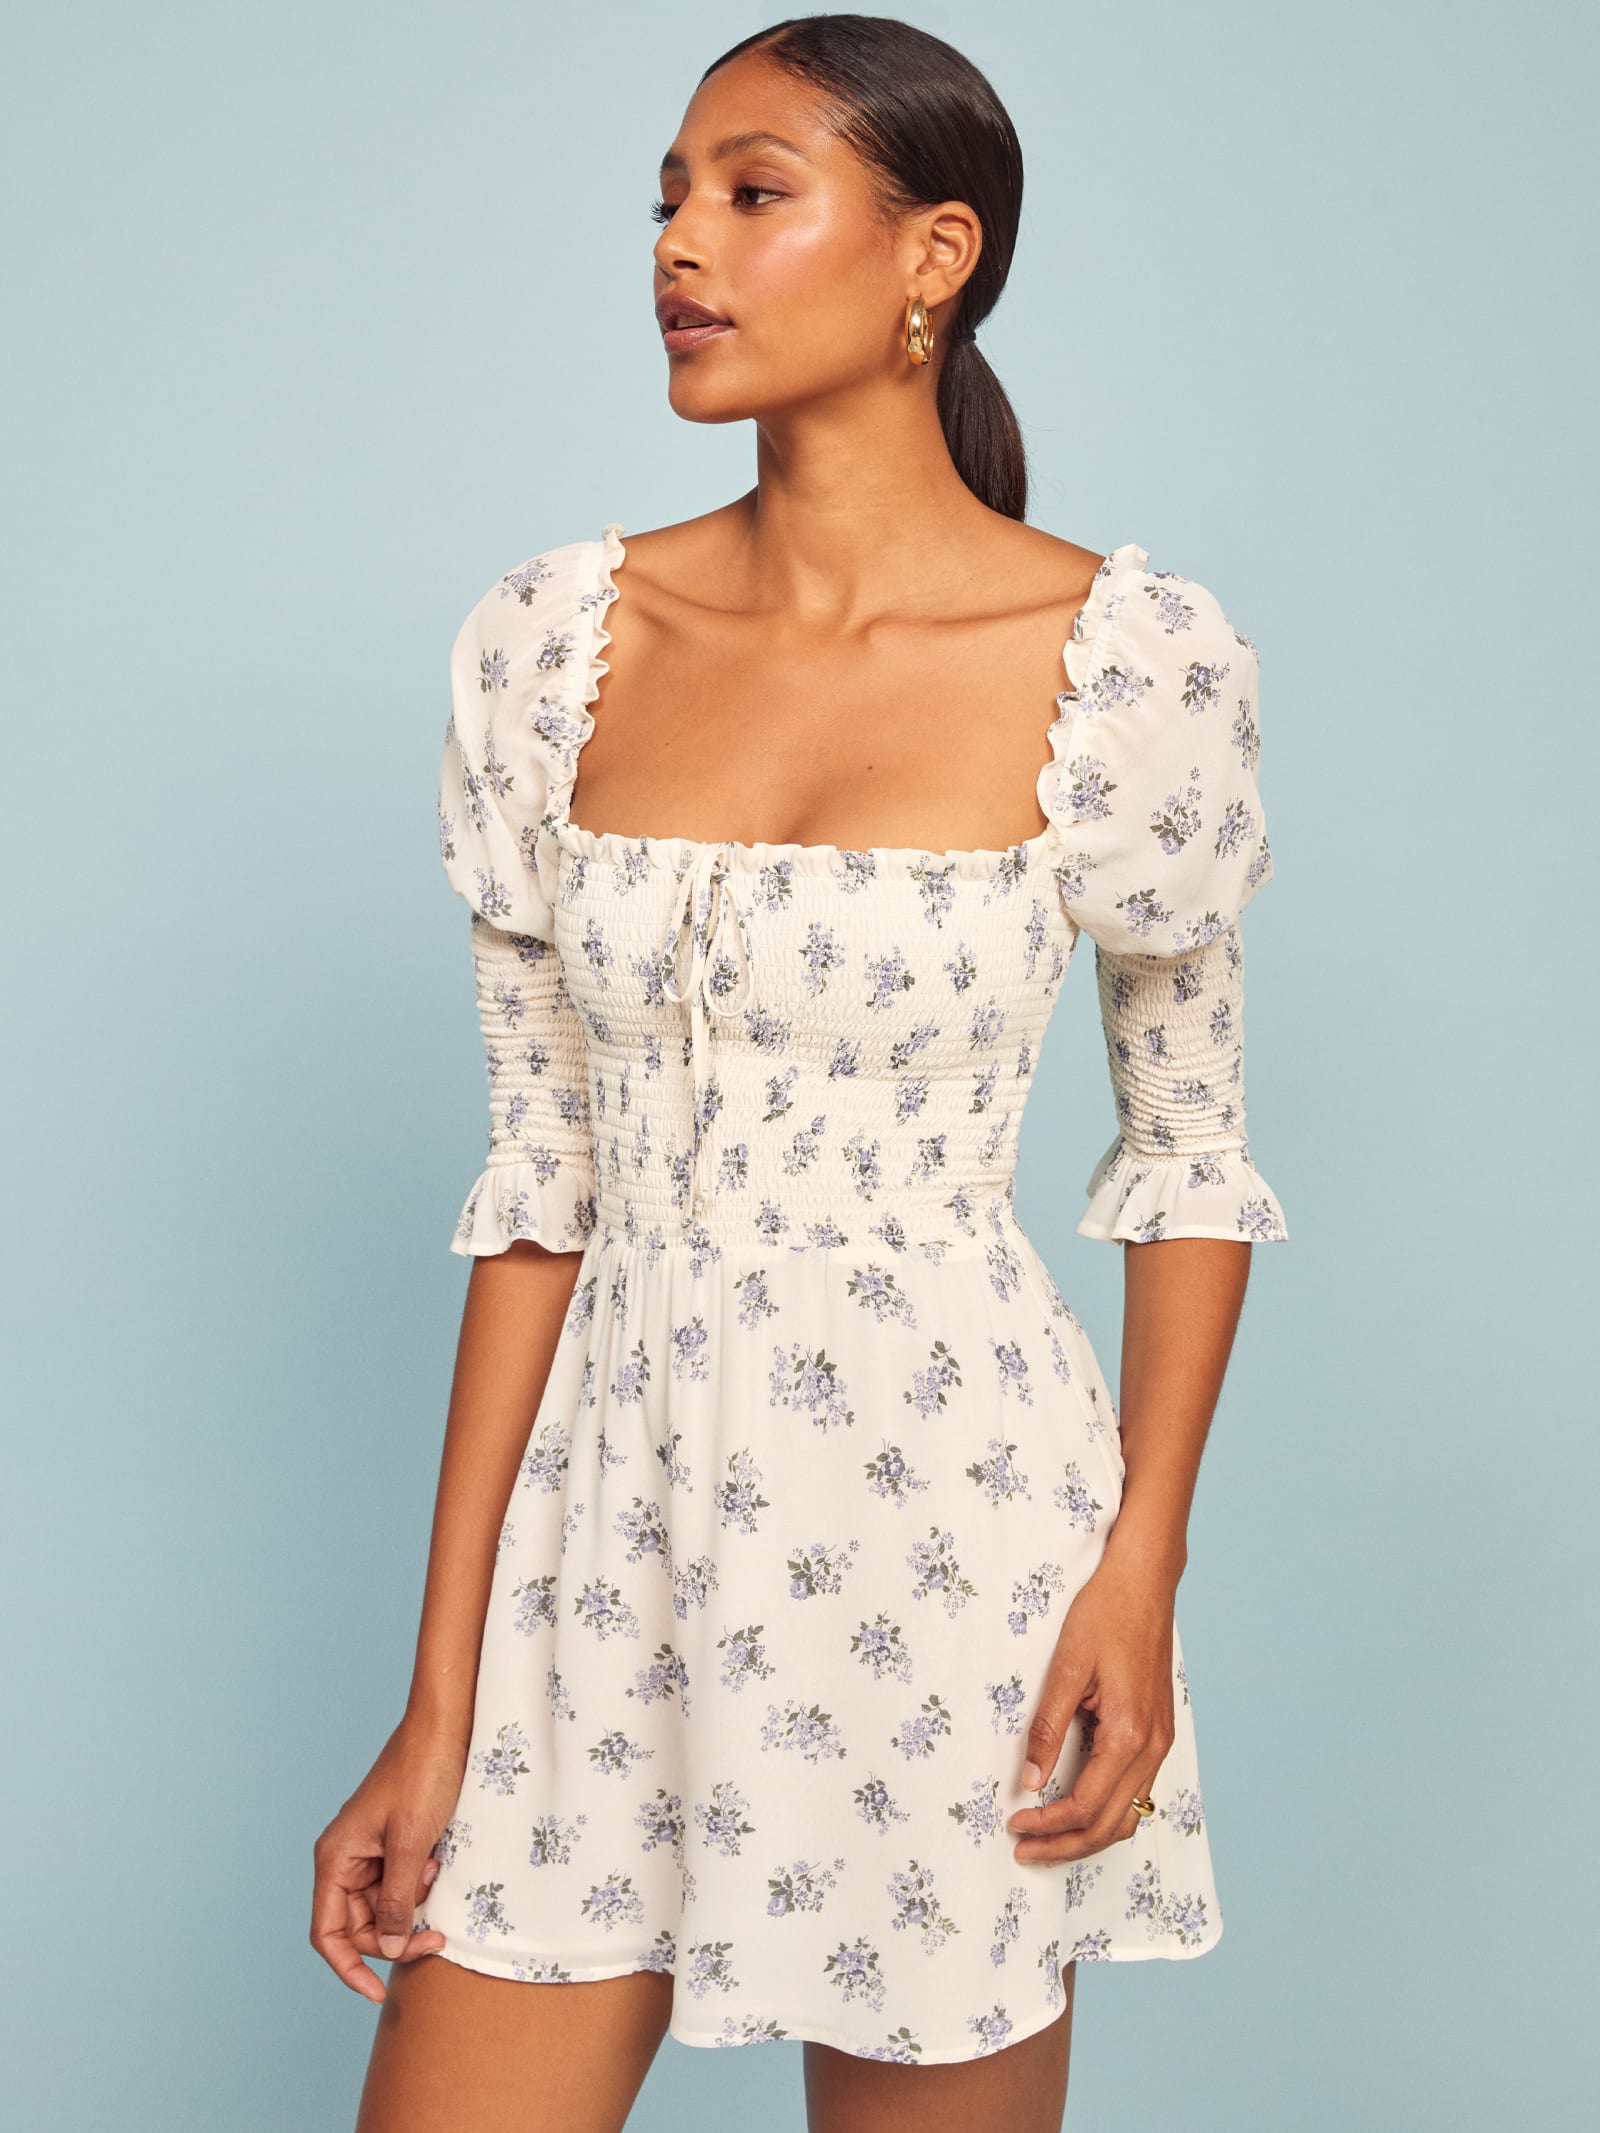 loose fitting mother of the bride dresses